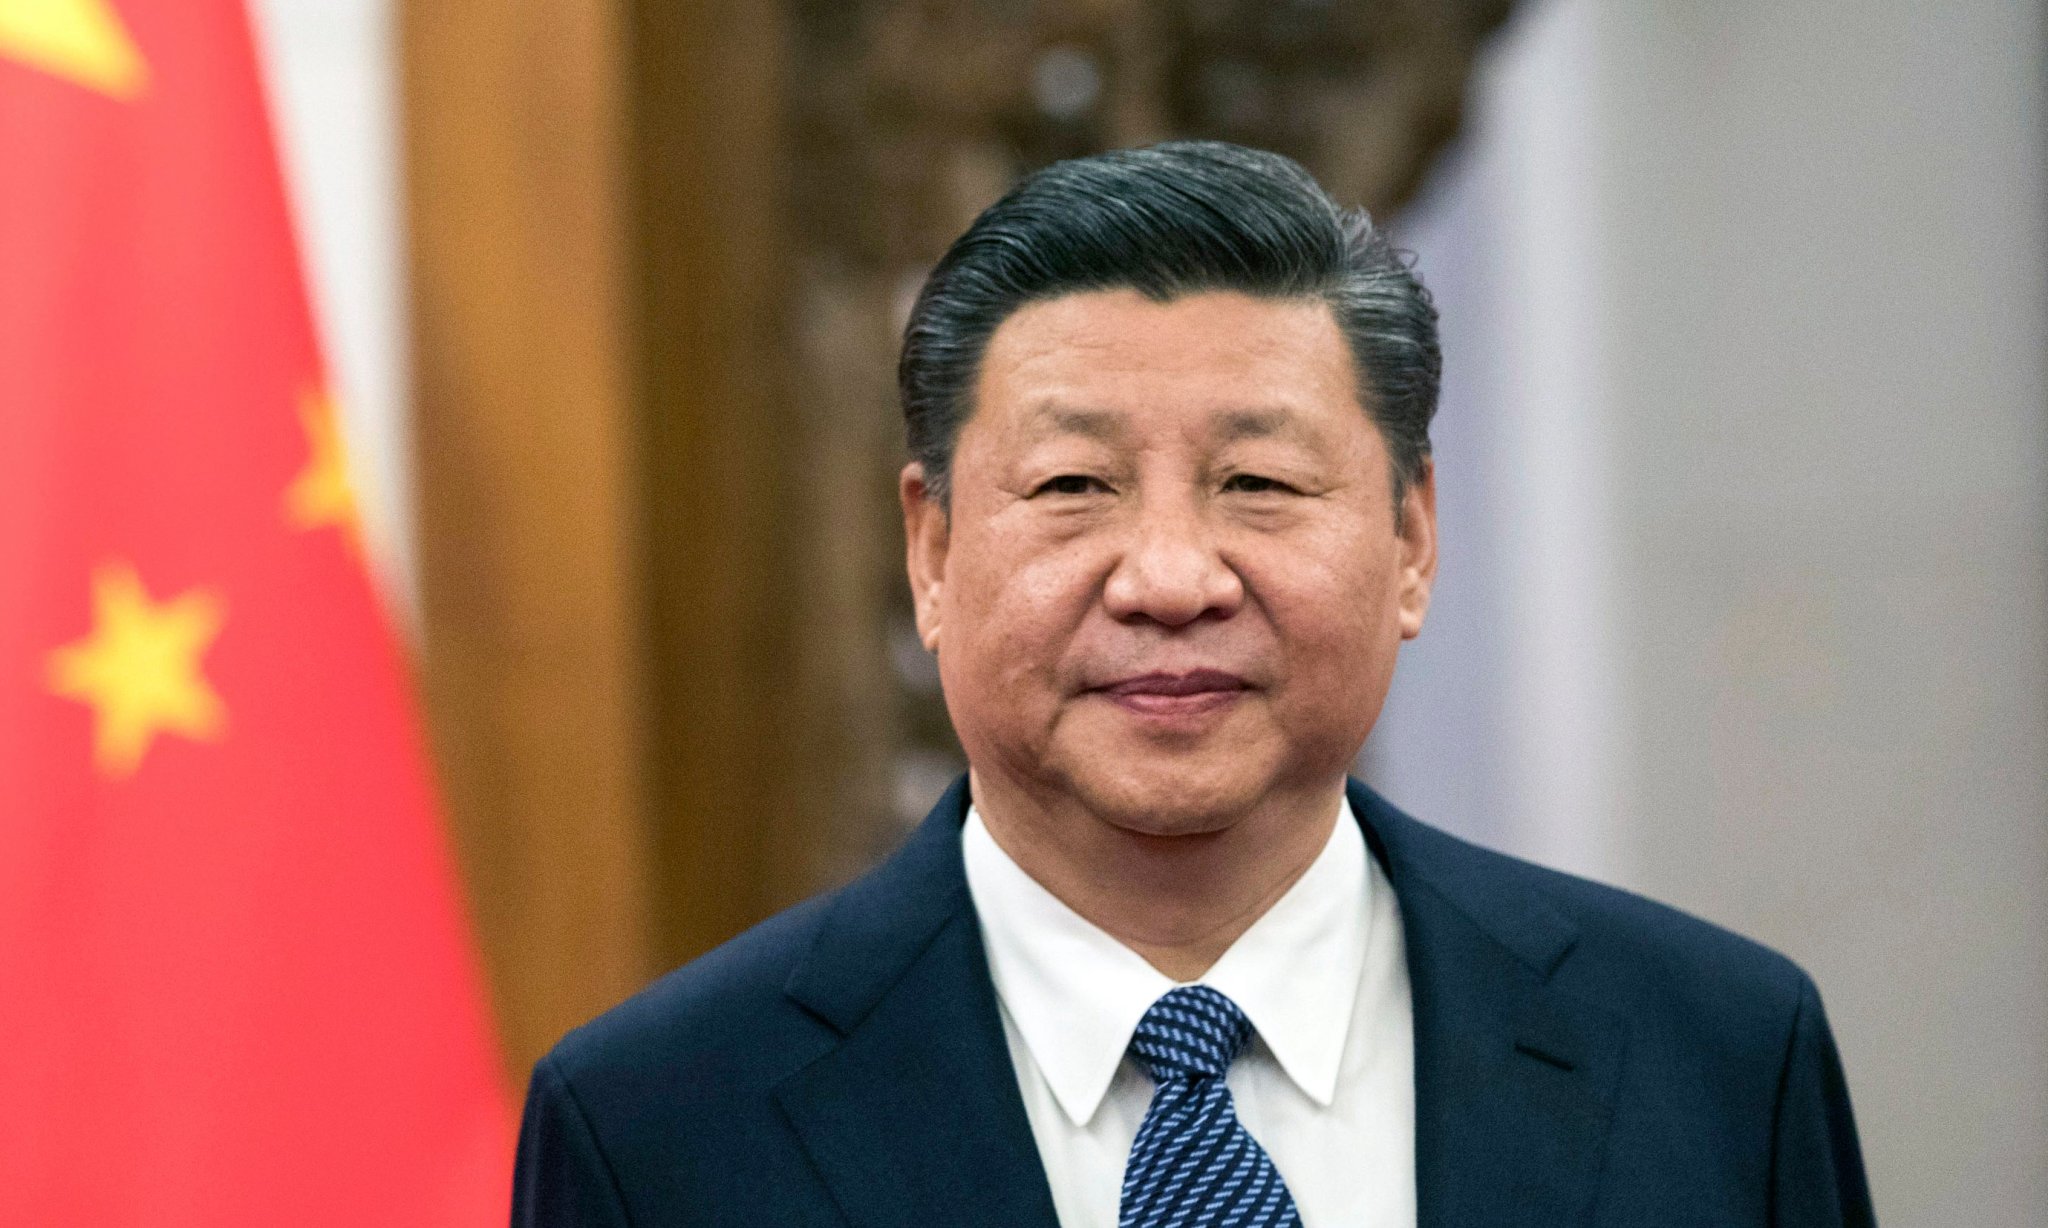 'Dictator for life': Xi Jinping's power grab condemned as step towards tyranny